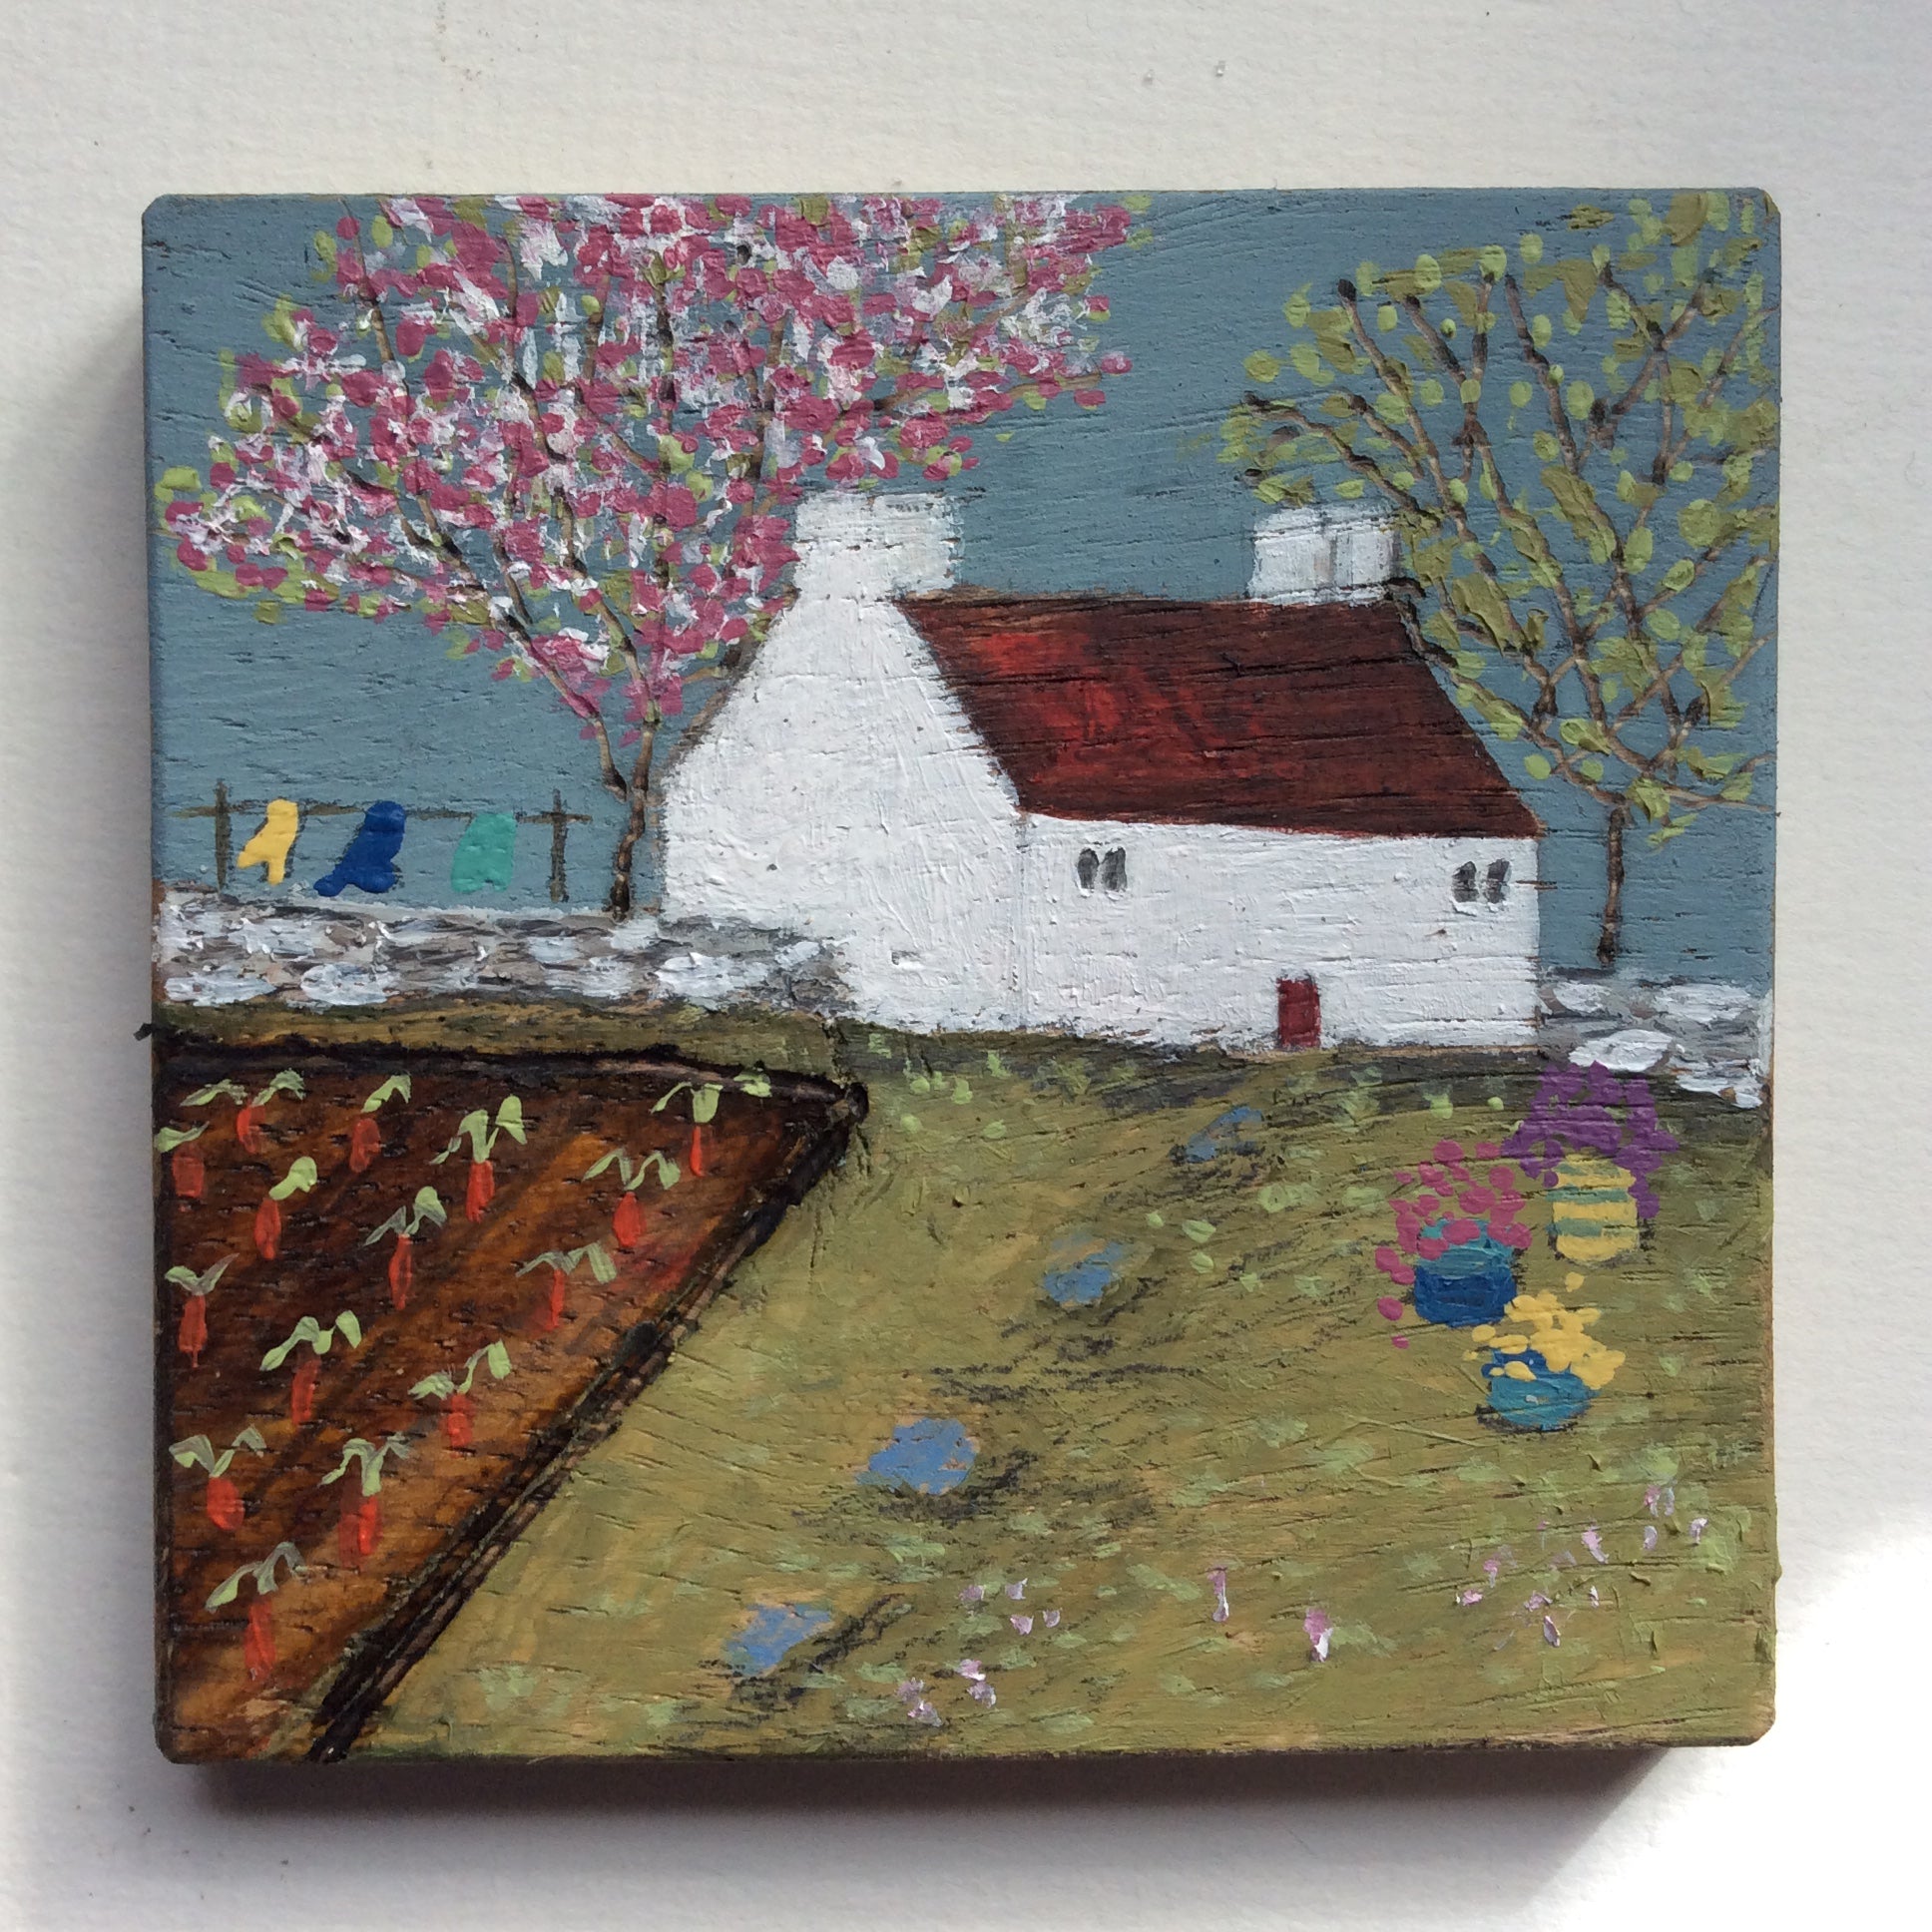 Copy of Mini Mixed Media Art on wood By Louise O'Hara - "Allotment Cottage”